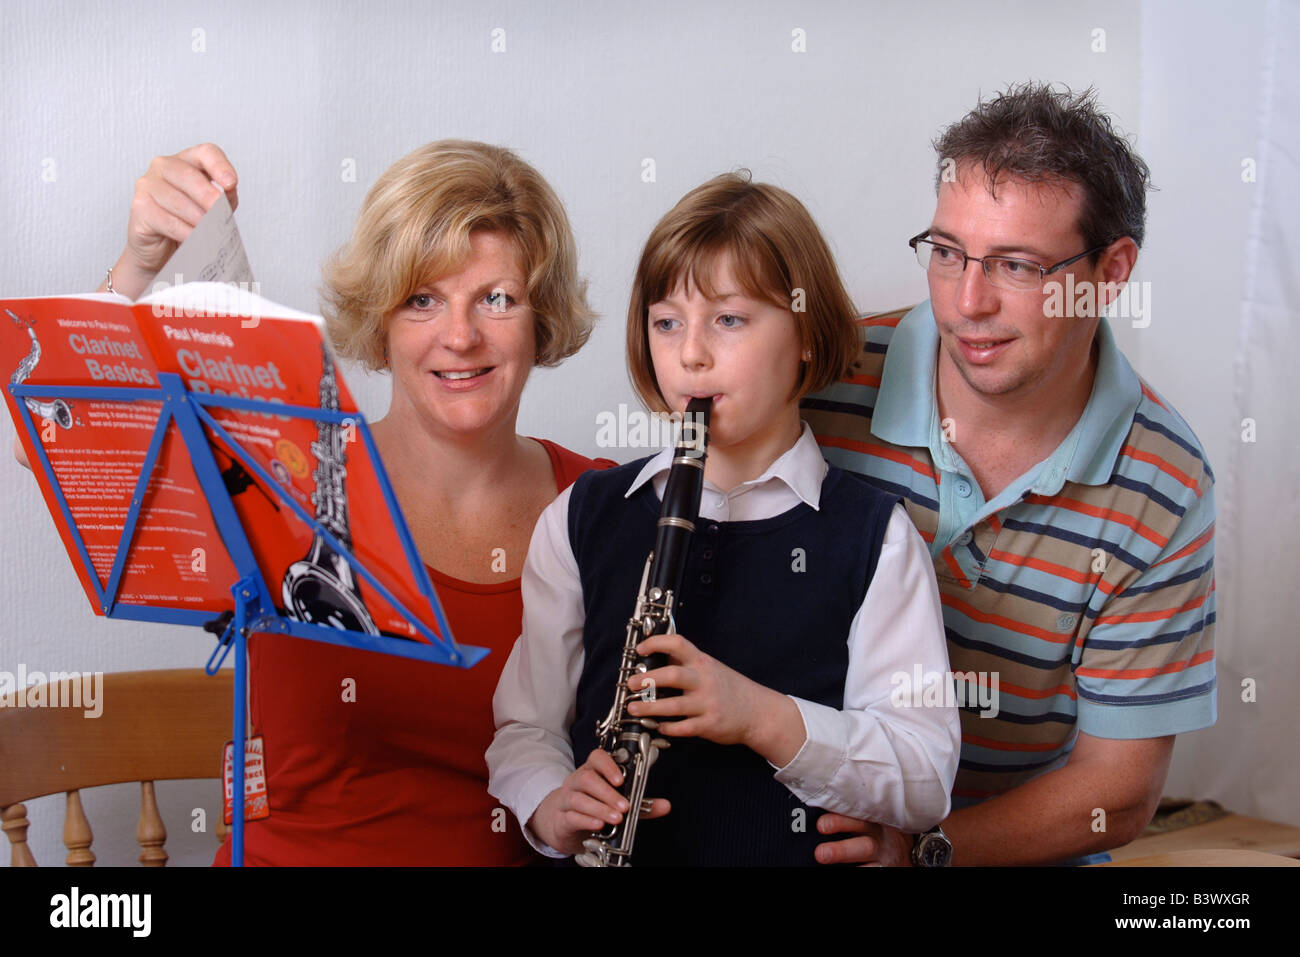 A YOUNG SCHOOLGIRL PRACTICES THE CLARINET HELPED BY HER PARENTS UK Stock Photo